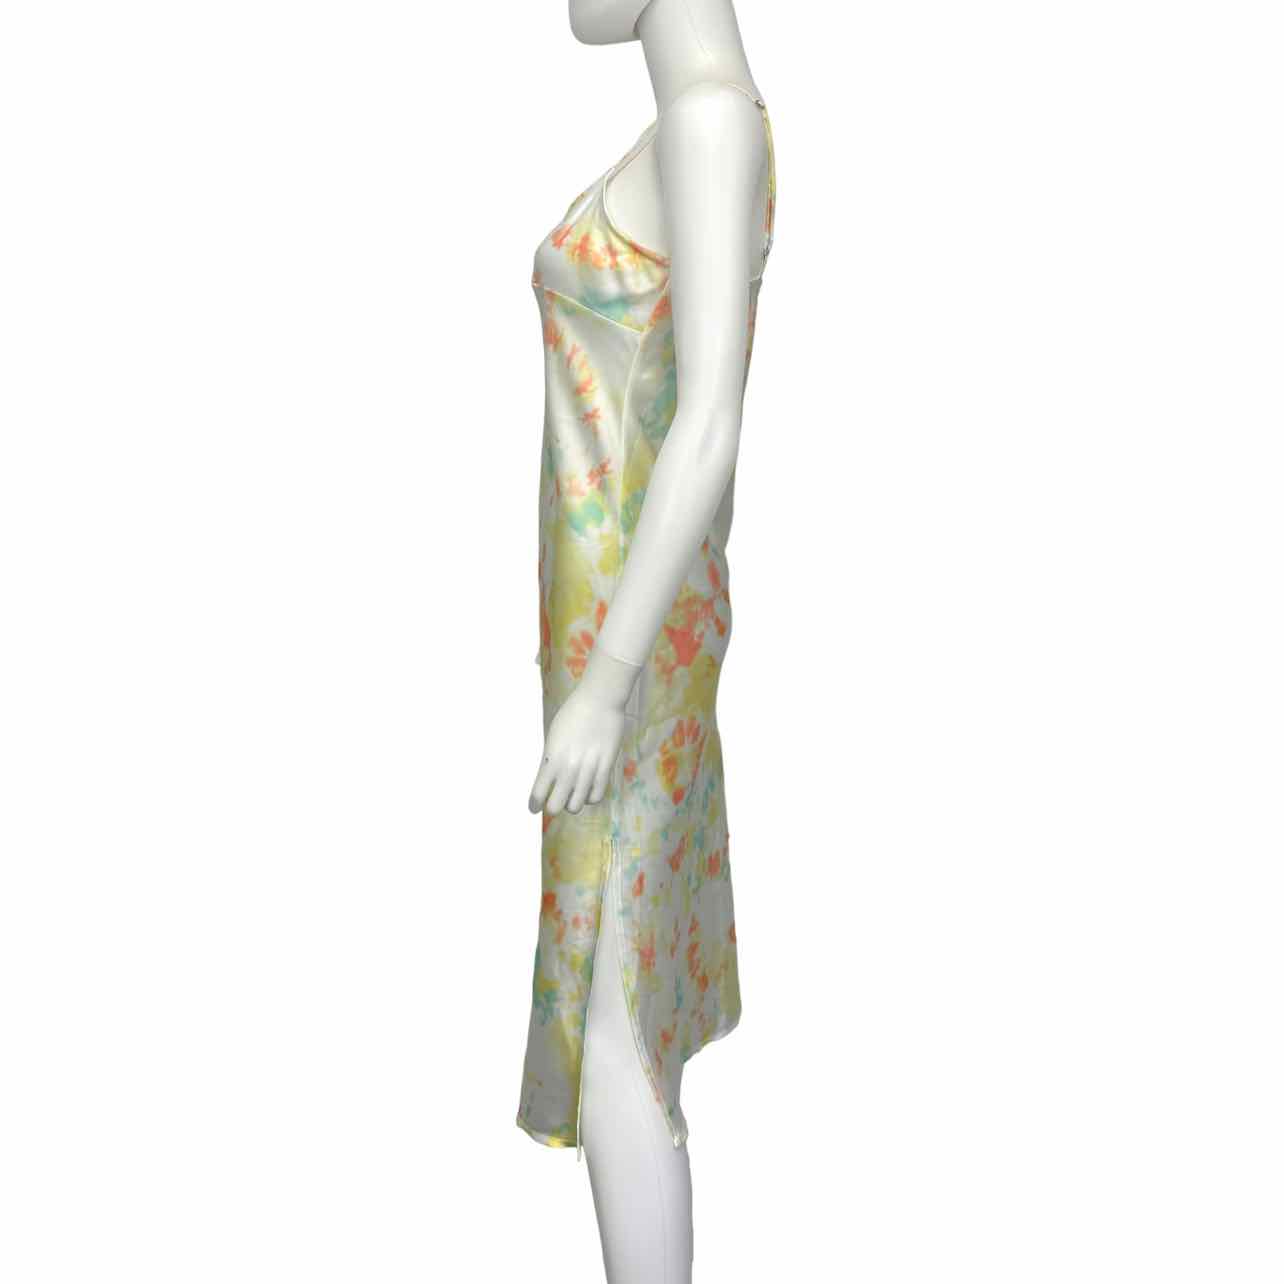 French Connection Tie-Dye Slip Dress Size 4